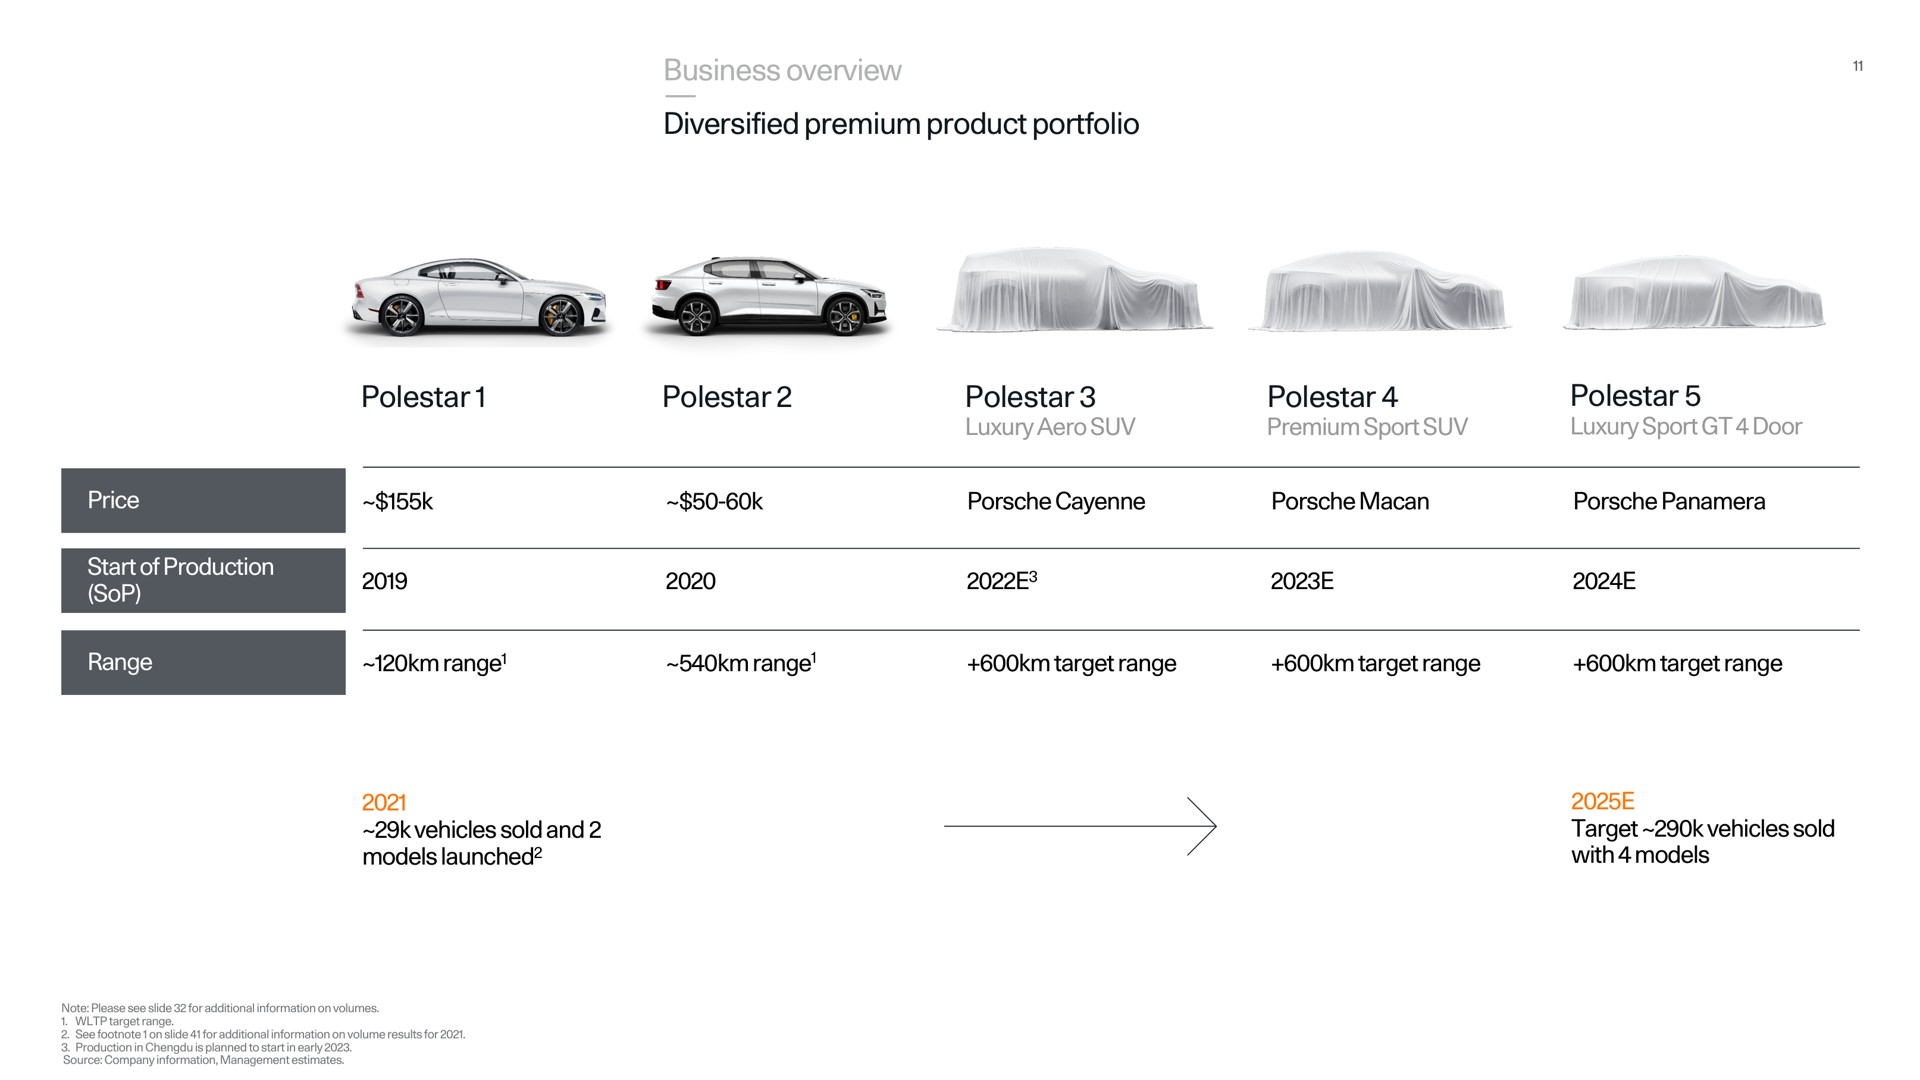 business overview diversified premium product portfolio polestar polestar polestar polestar polestar i an nan | Polestar